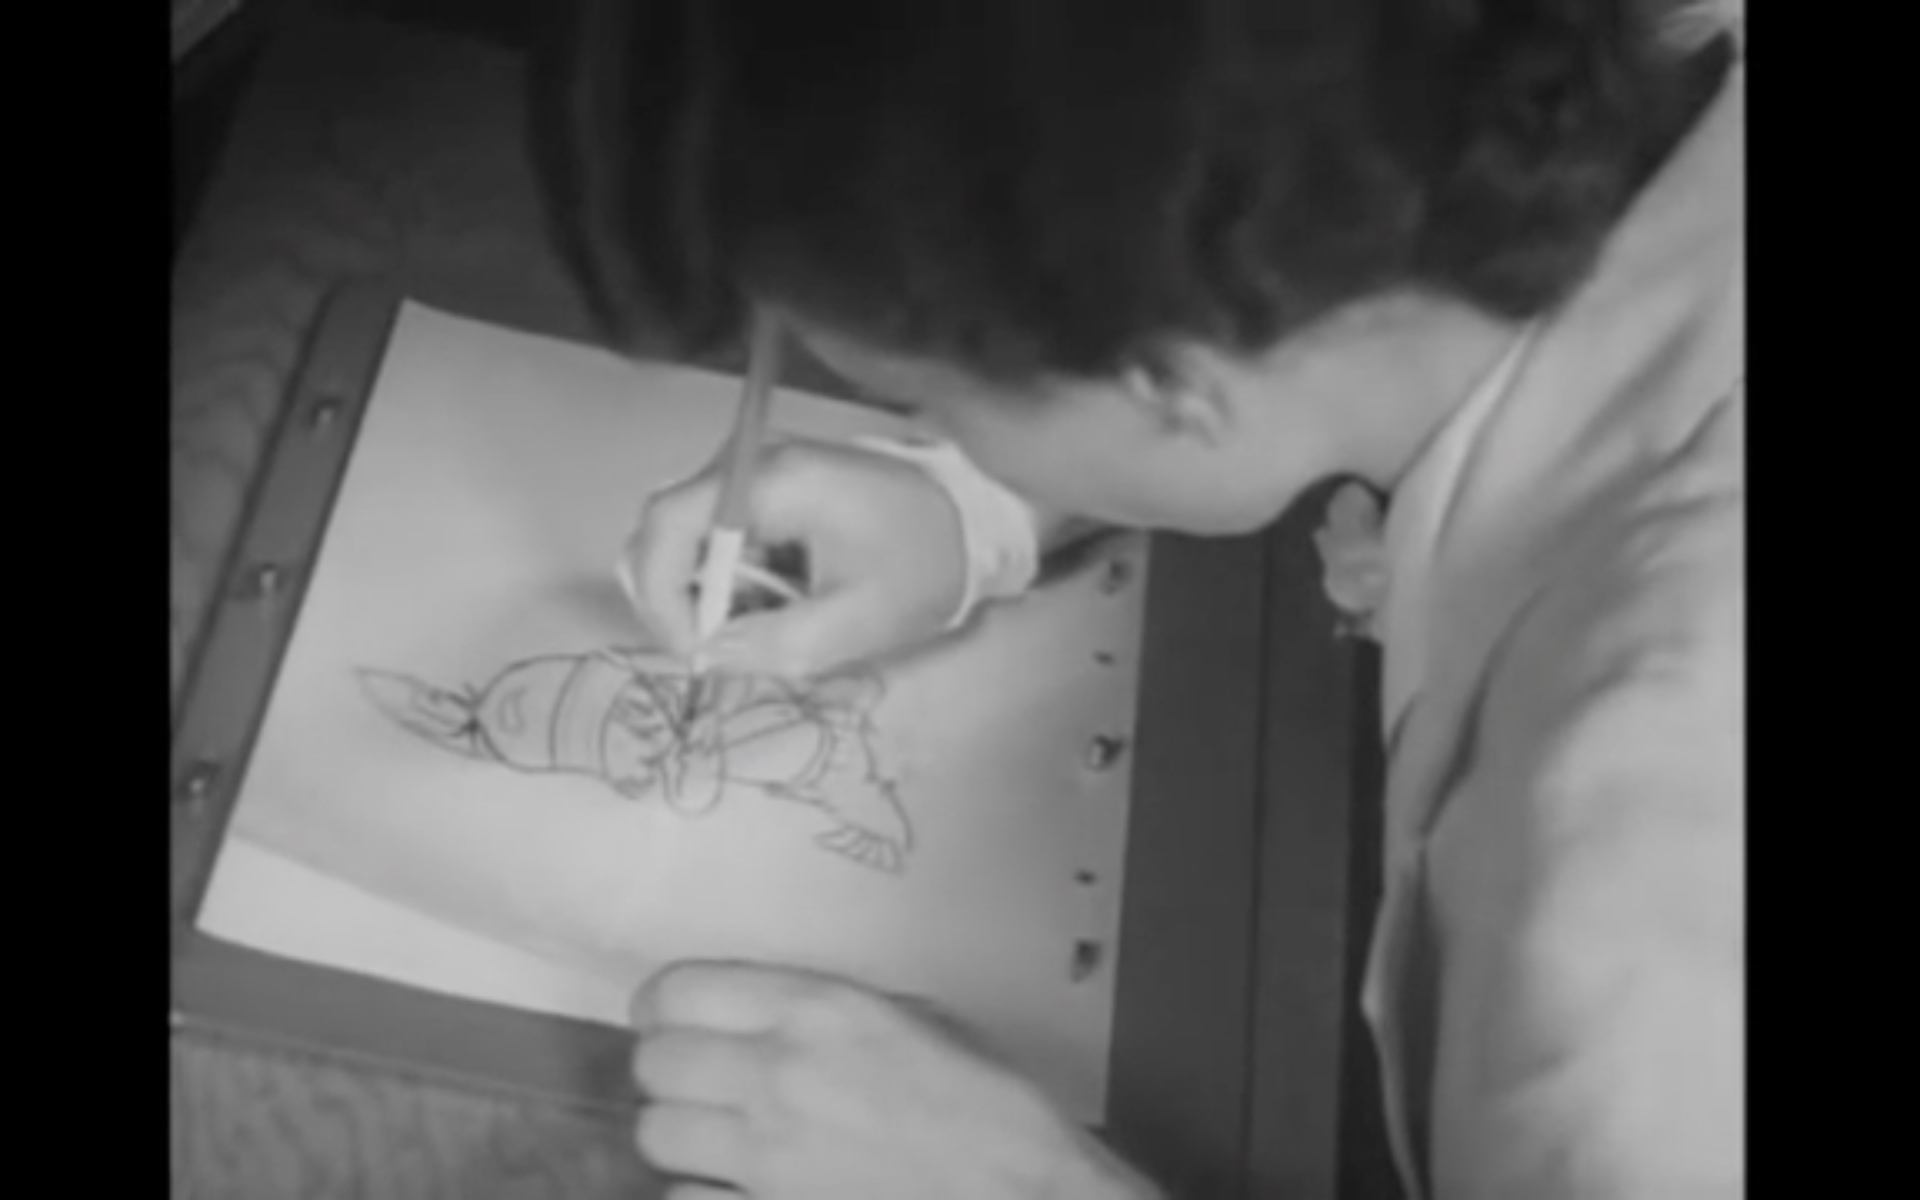 How Walt Disney Cartoons Are Made: 1939 Documentary Gives an Inside Look |  Open Culture